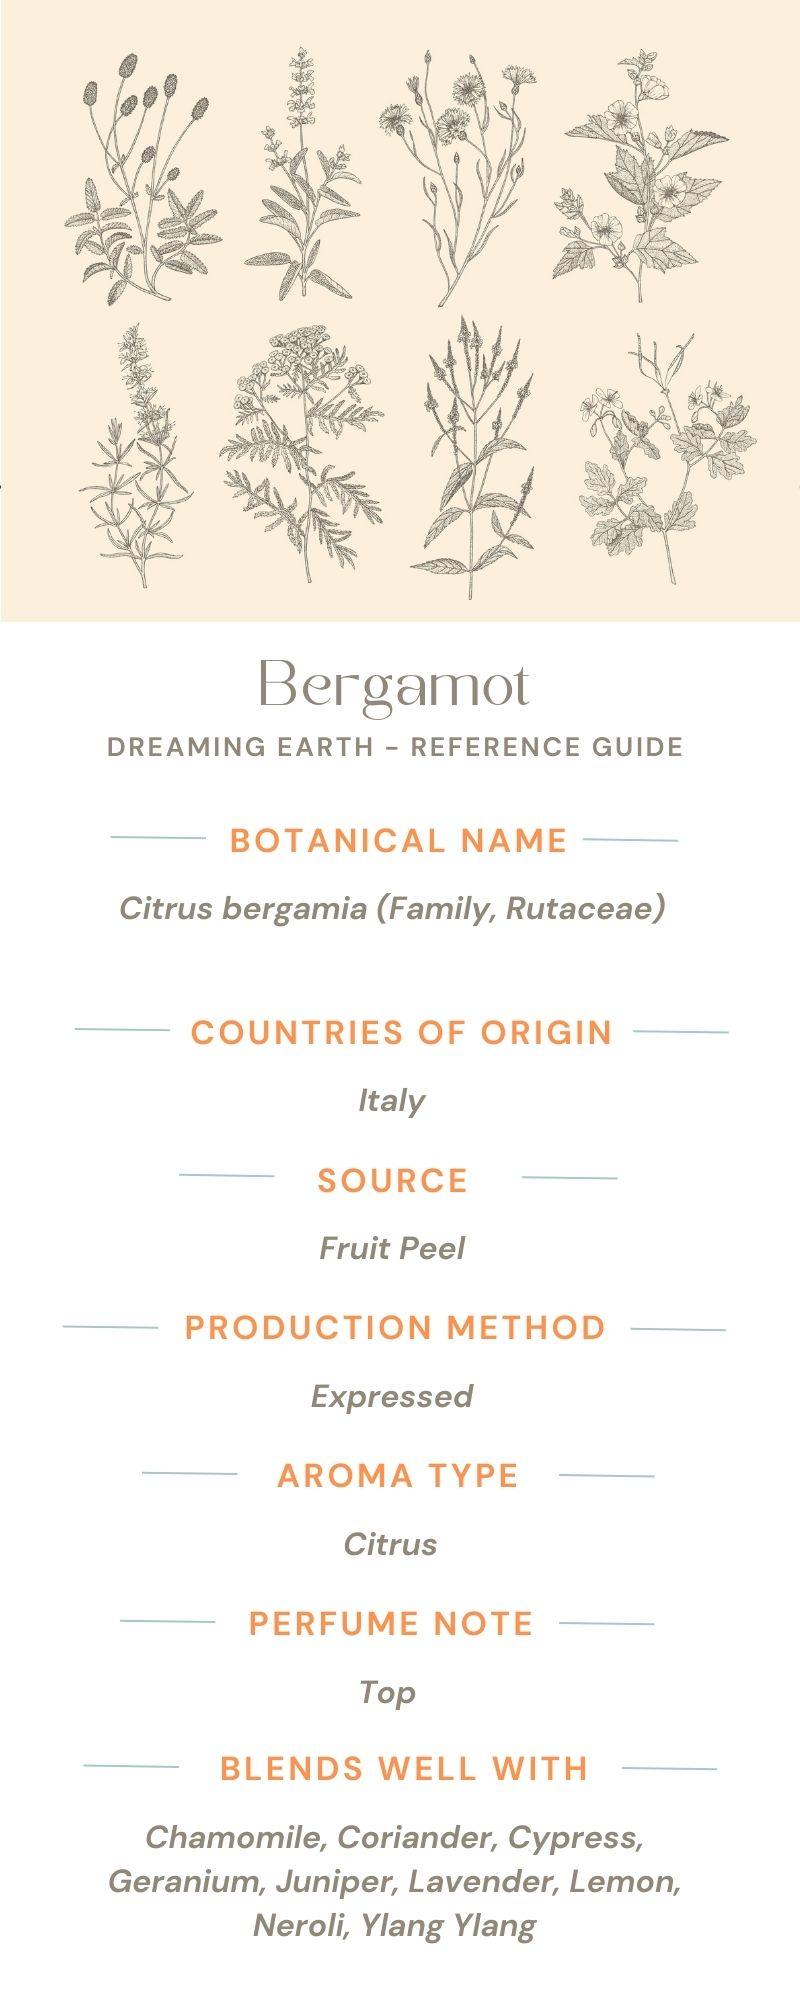 Load image into Gallery viewer, Bergamot FCF Organic Essential Oil - Dreaming Earth Inc
